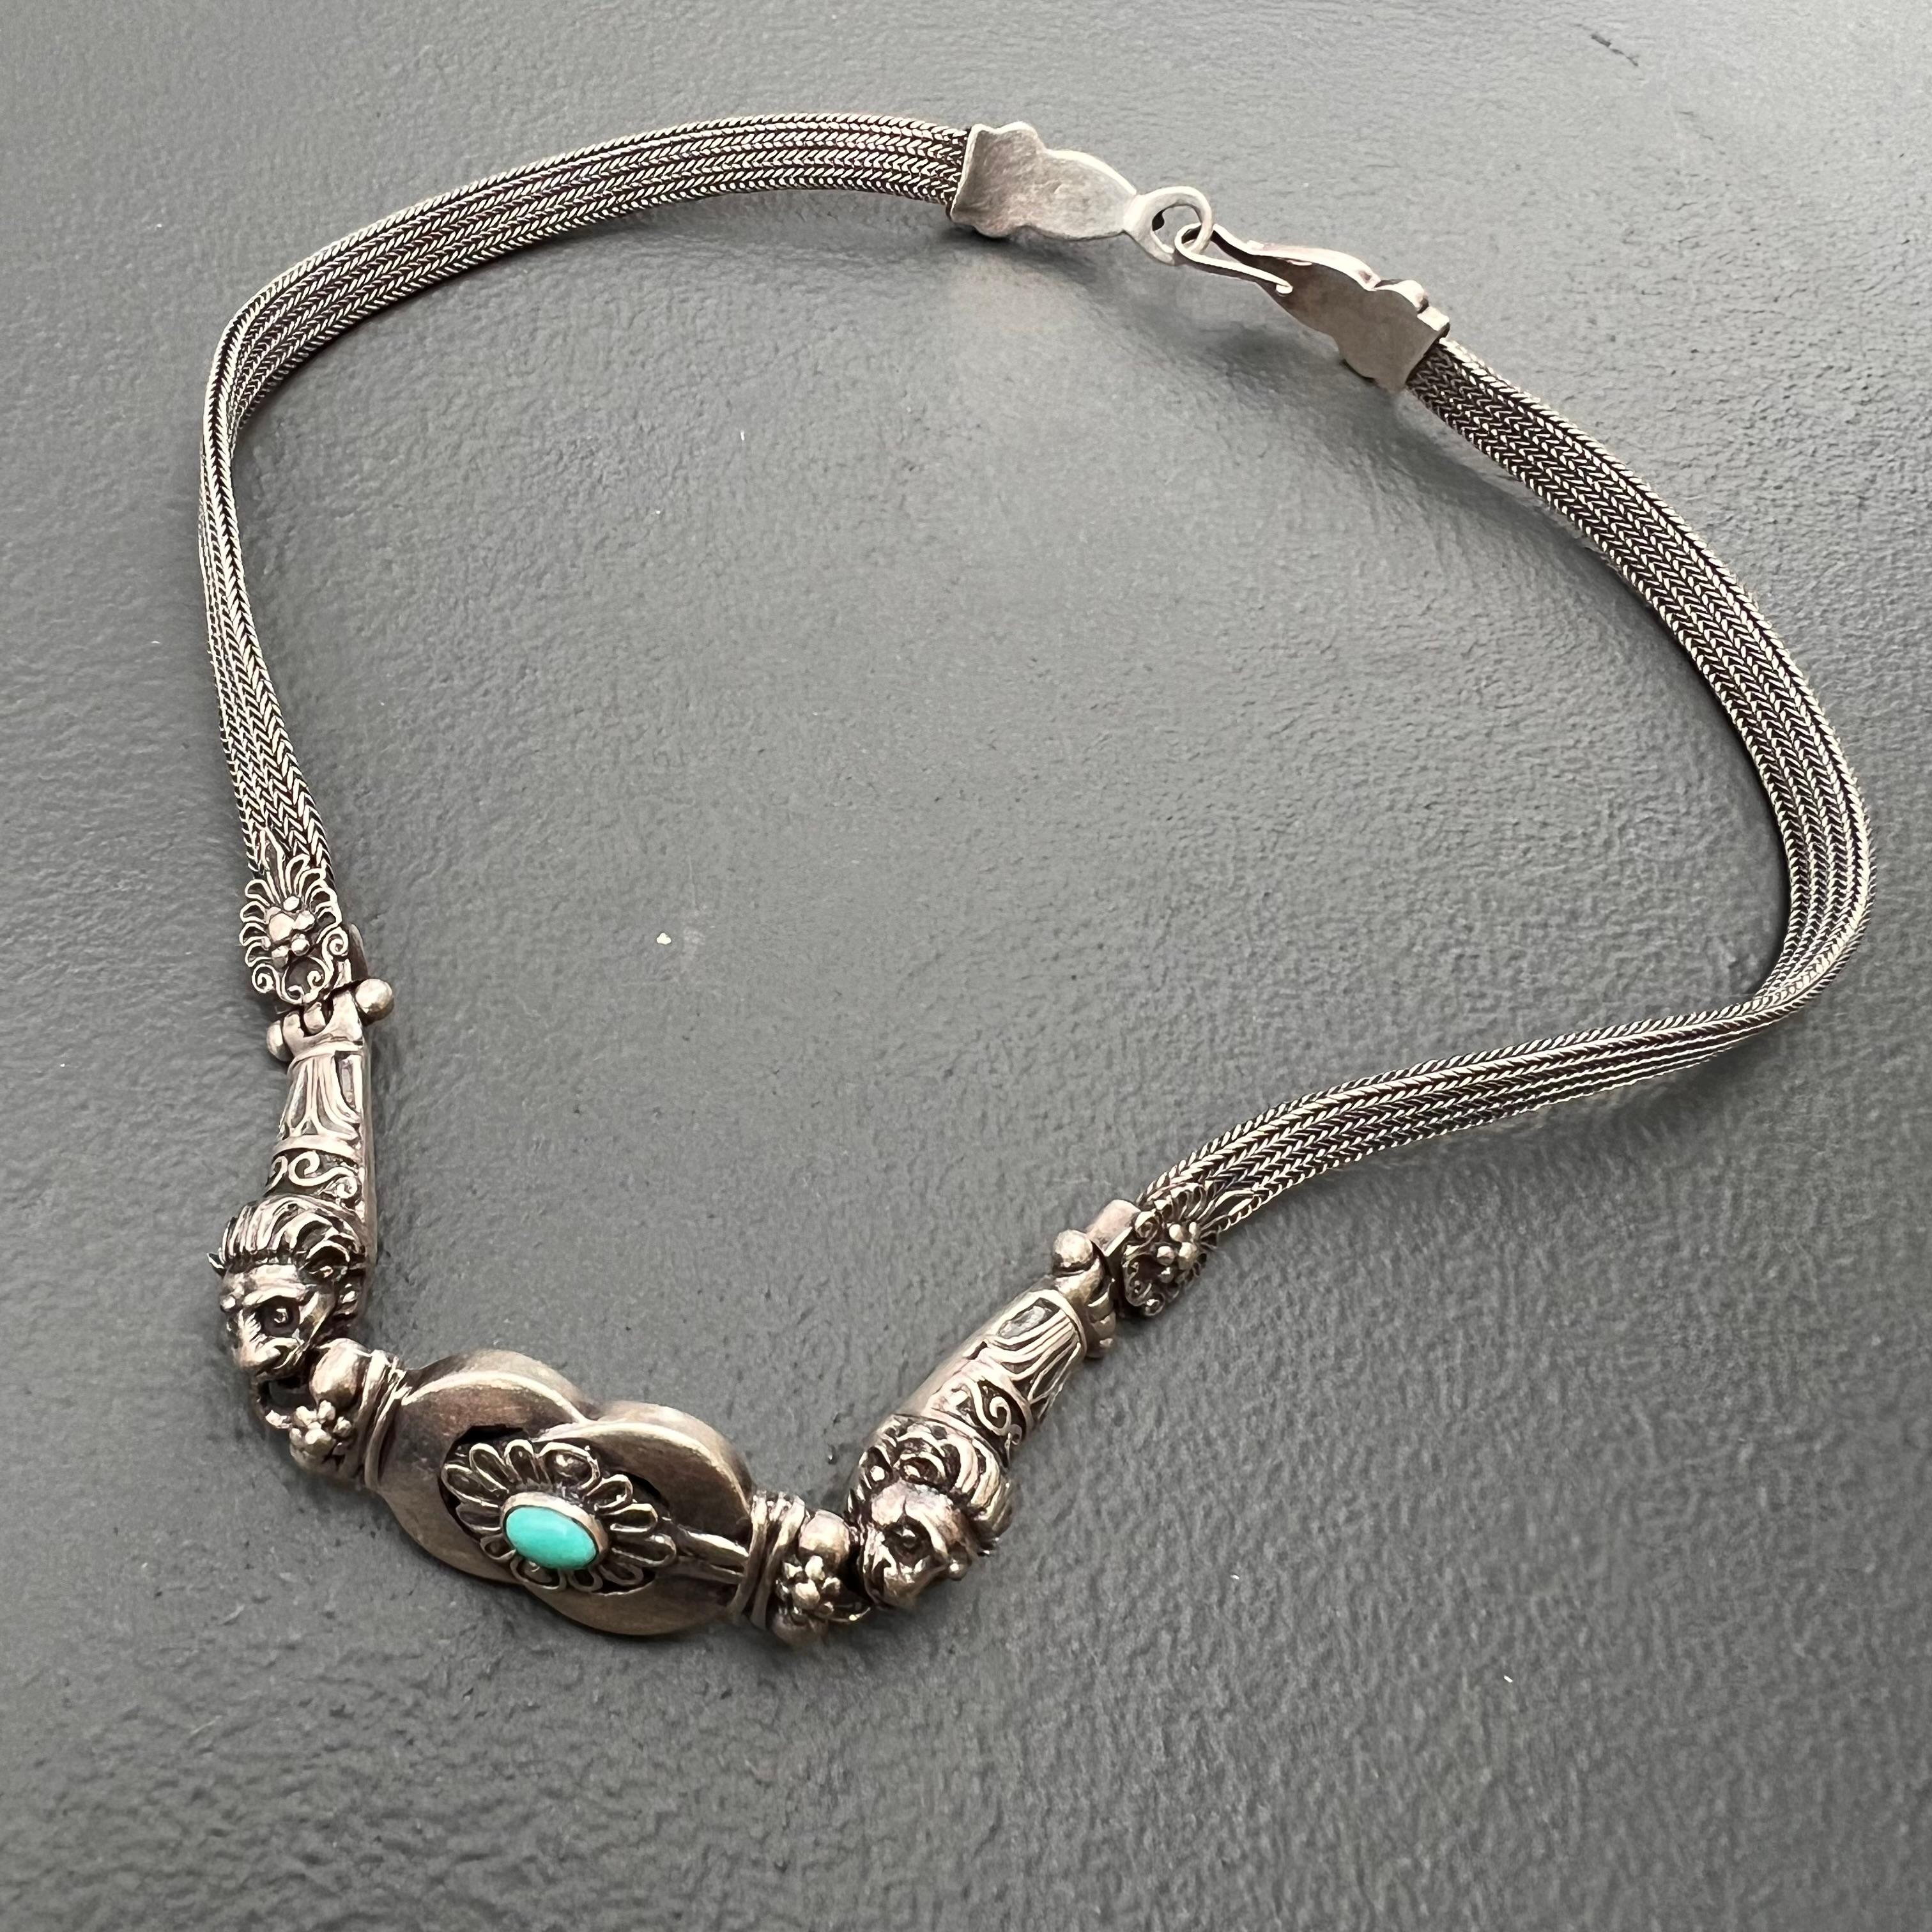 Fabulous  well made  sterling silver  choker necklace featuring  detailed lion heads on each sides of central pendant  flexible wide woven chain with ornate clasp on backside ( 